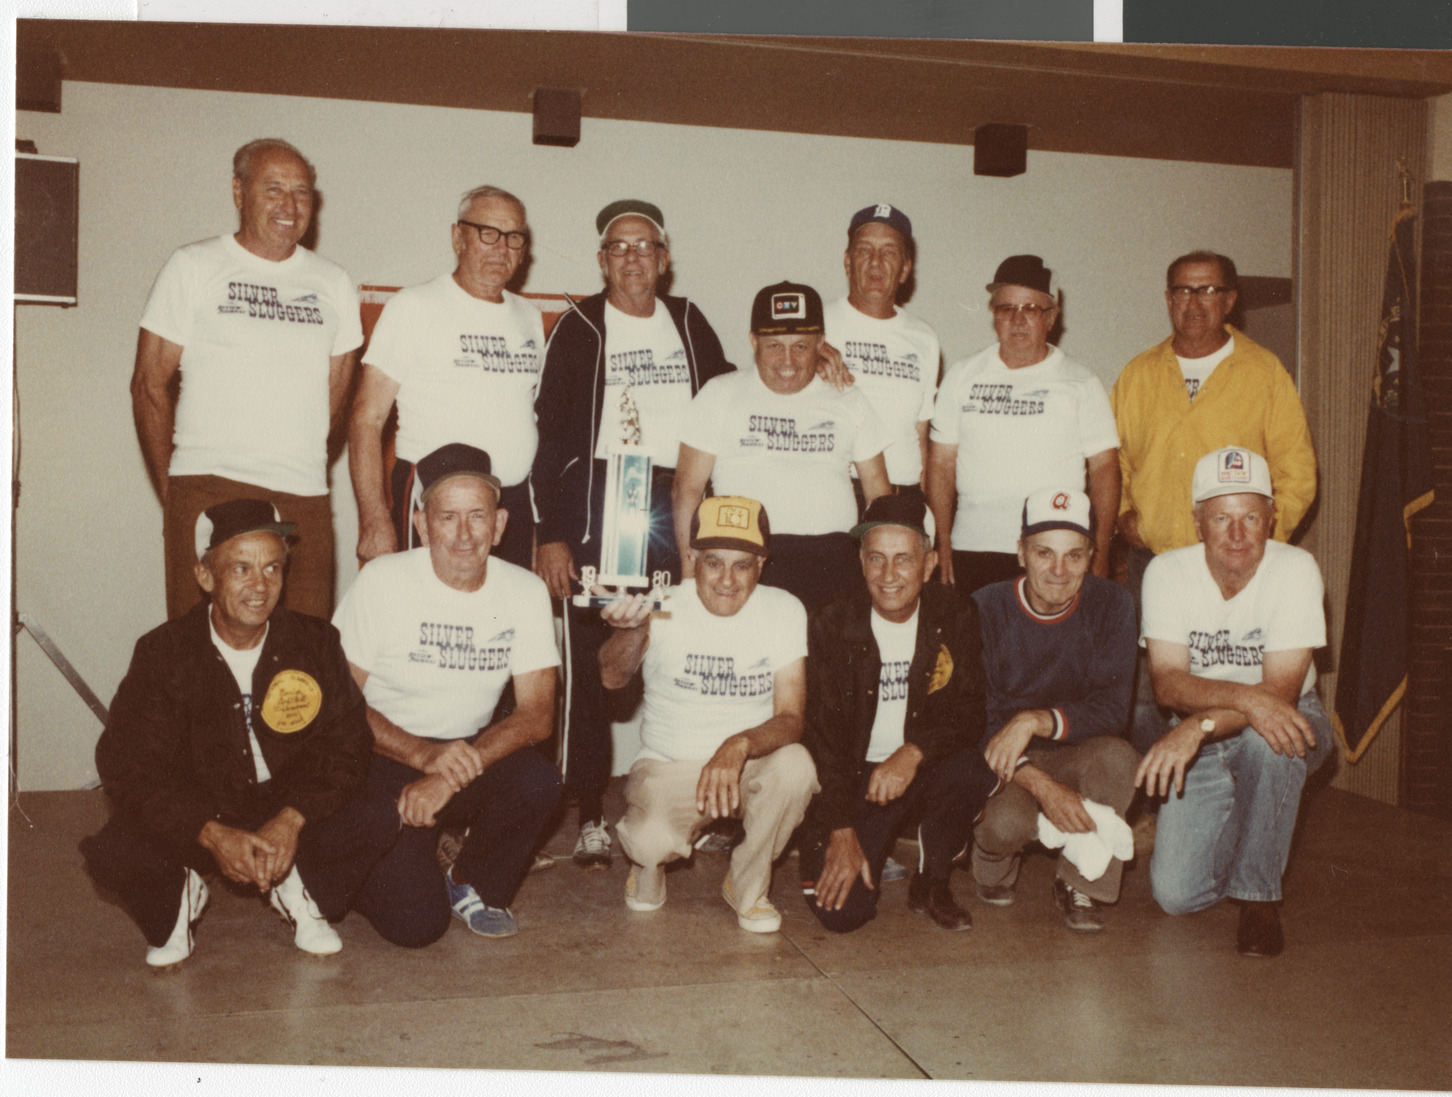 Photograph of a group of men with Silver Slugger t-shirts